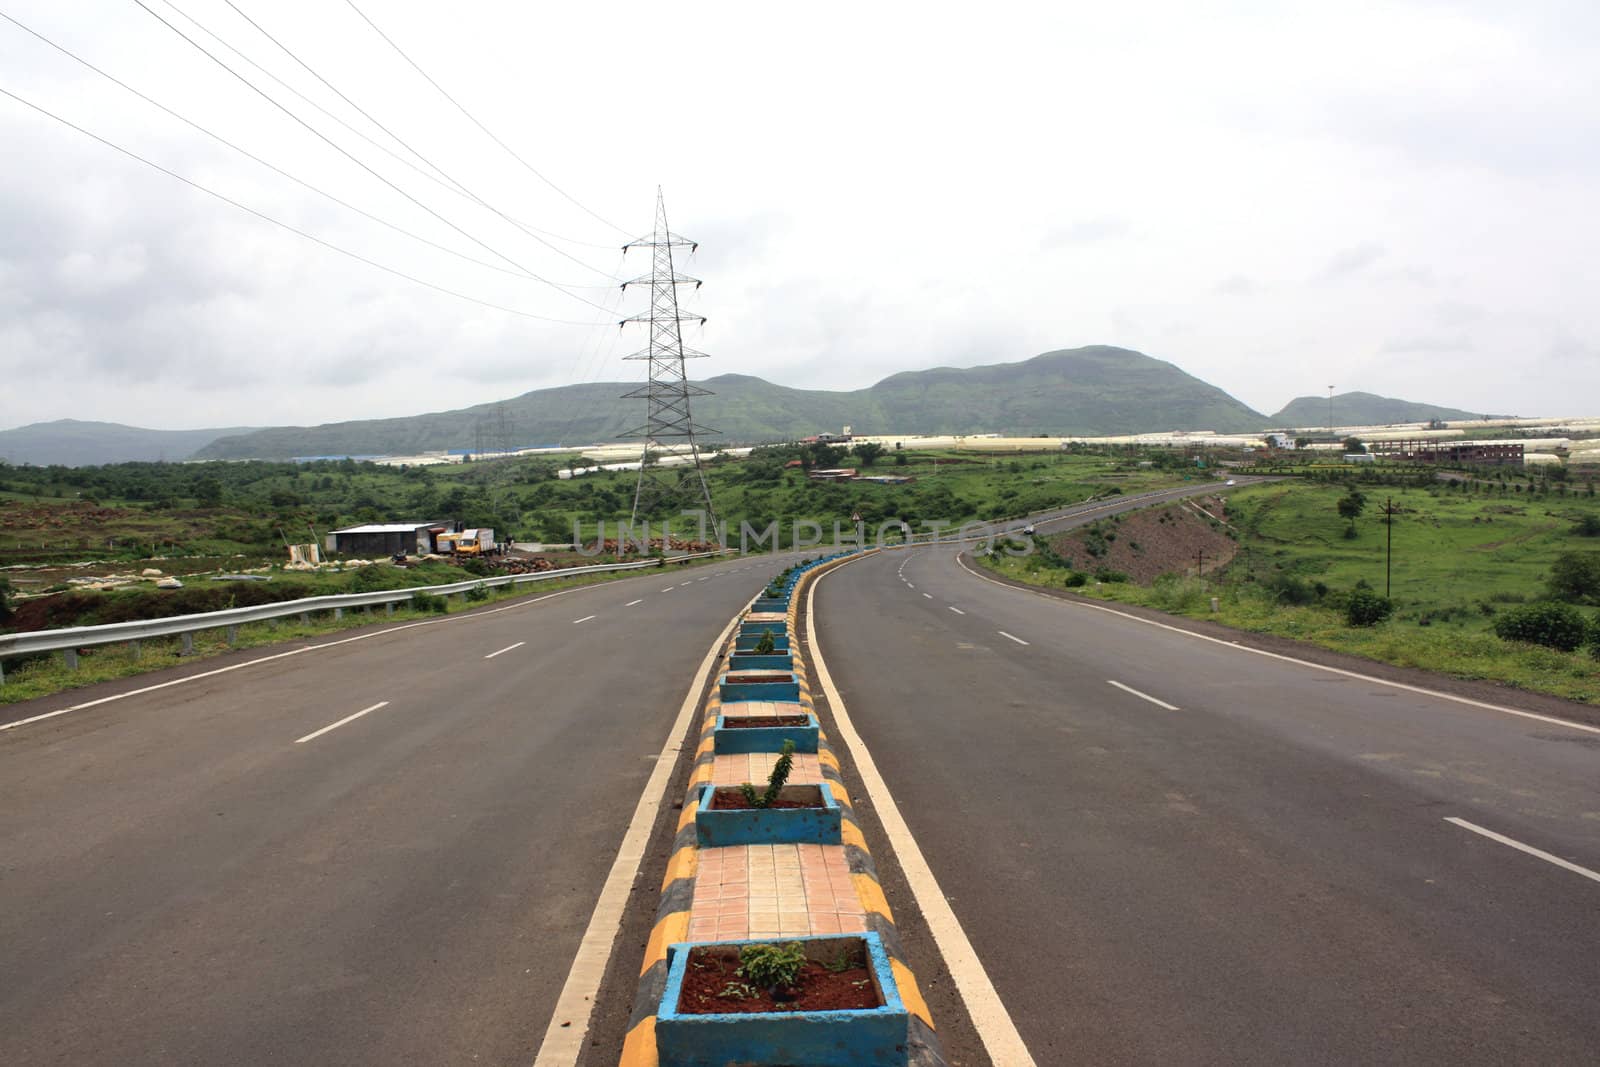 A long stretch of an empty highway in India.